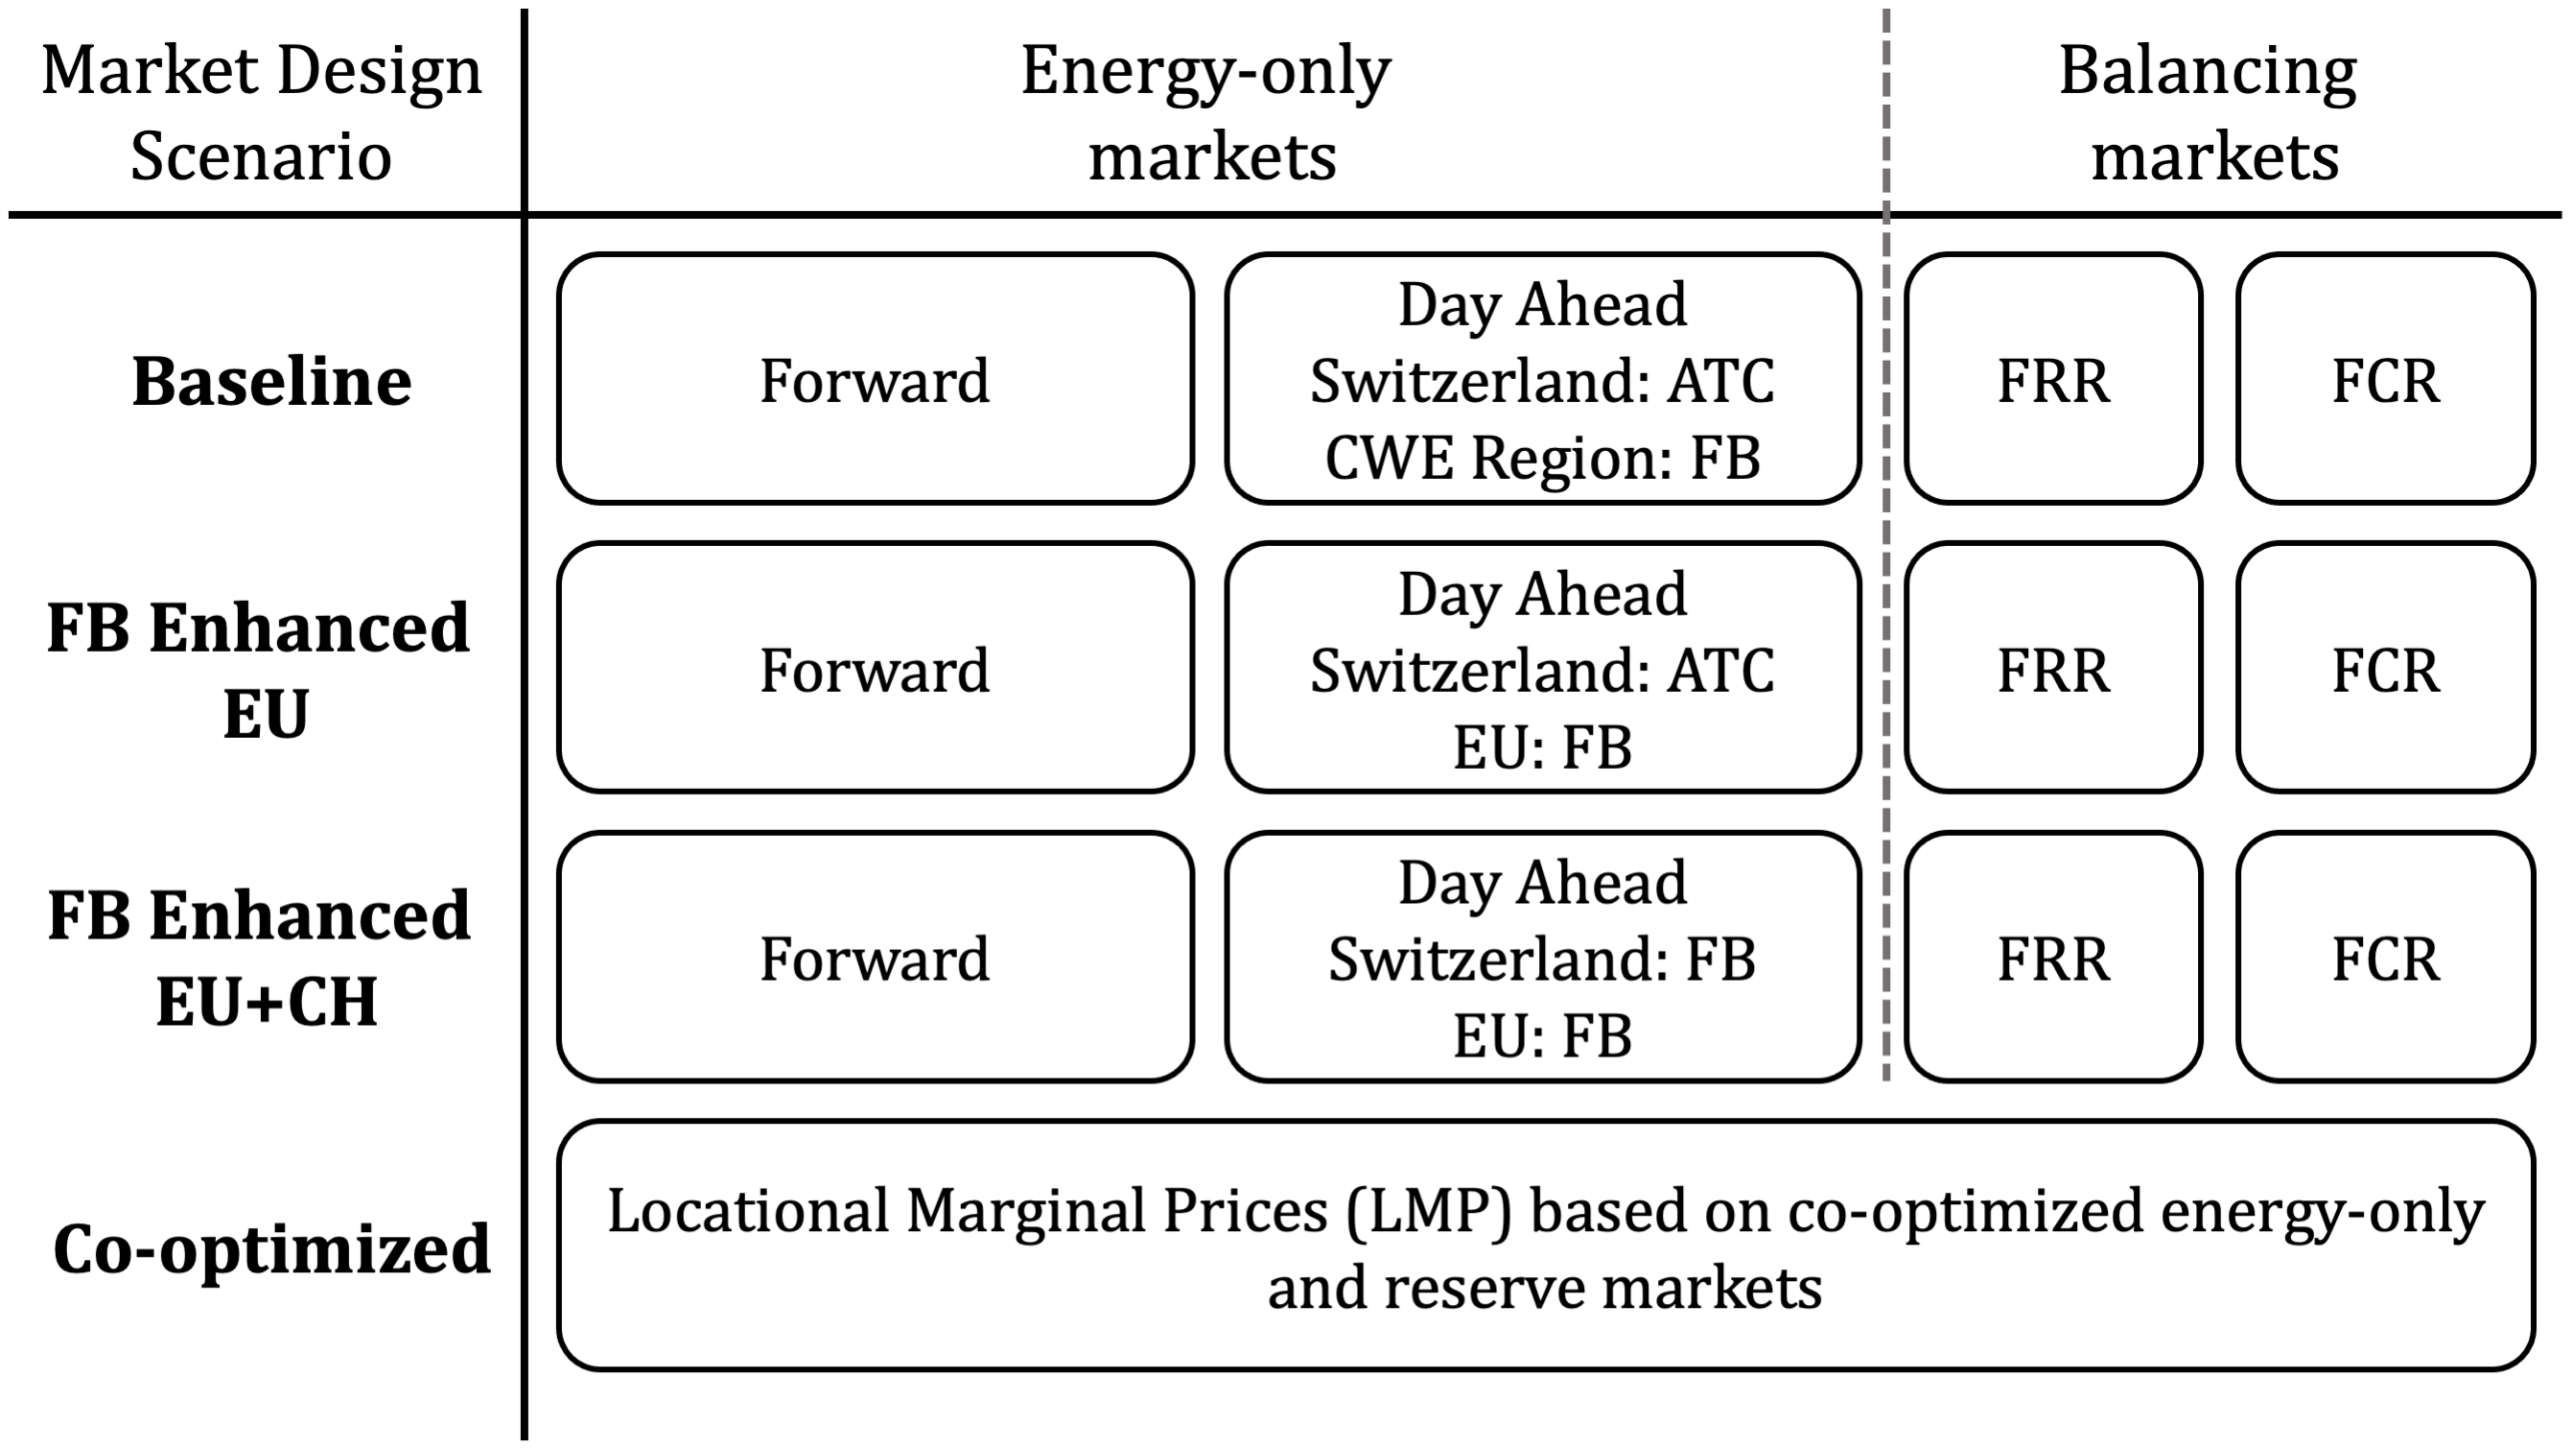 Figure: Overview of considered market designs